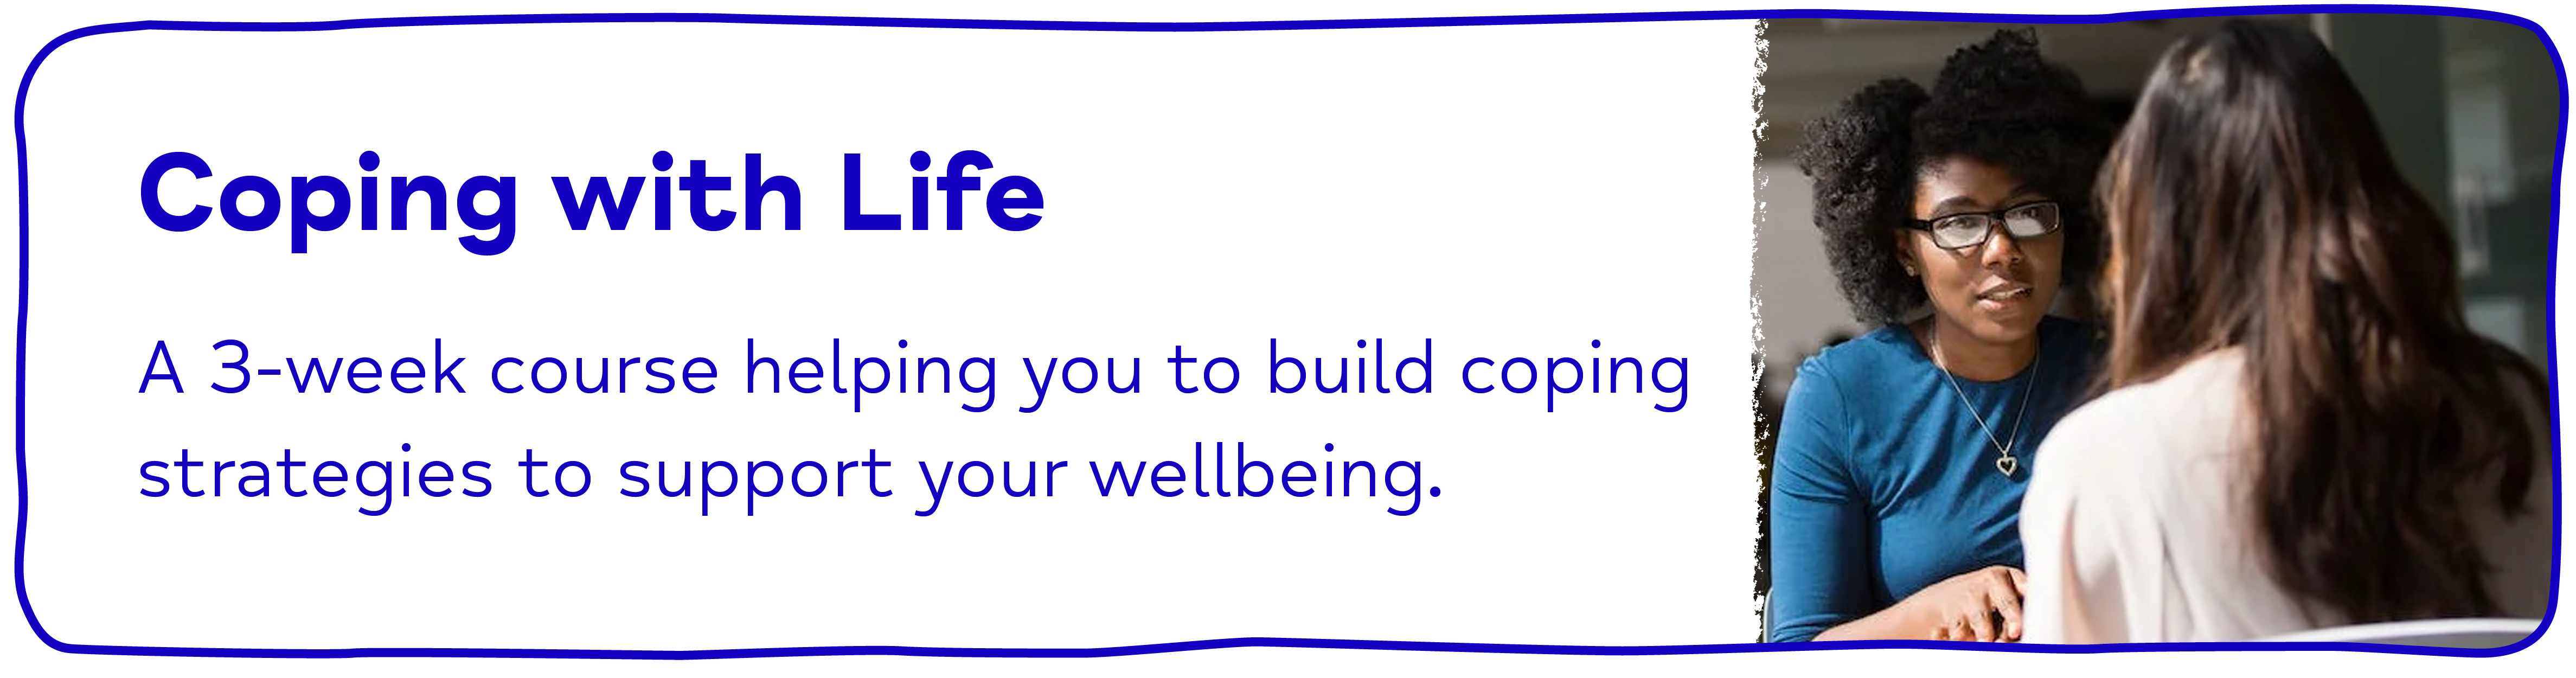 Coping with Life A 3-week course helping you to build coping strategies to support your wellbeing.